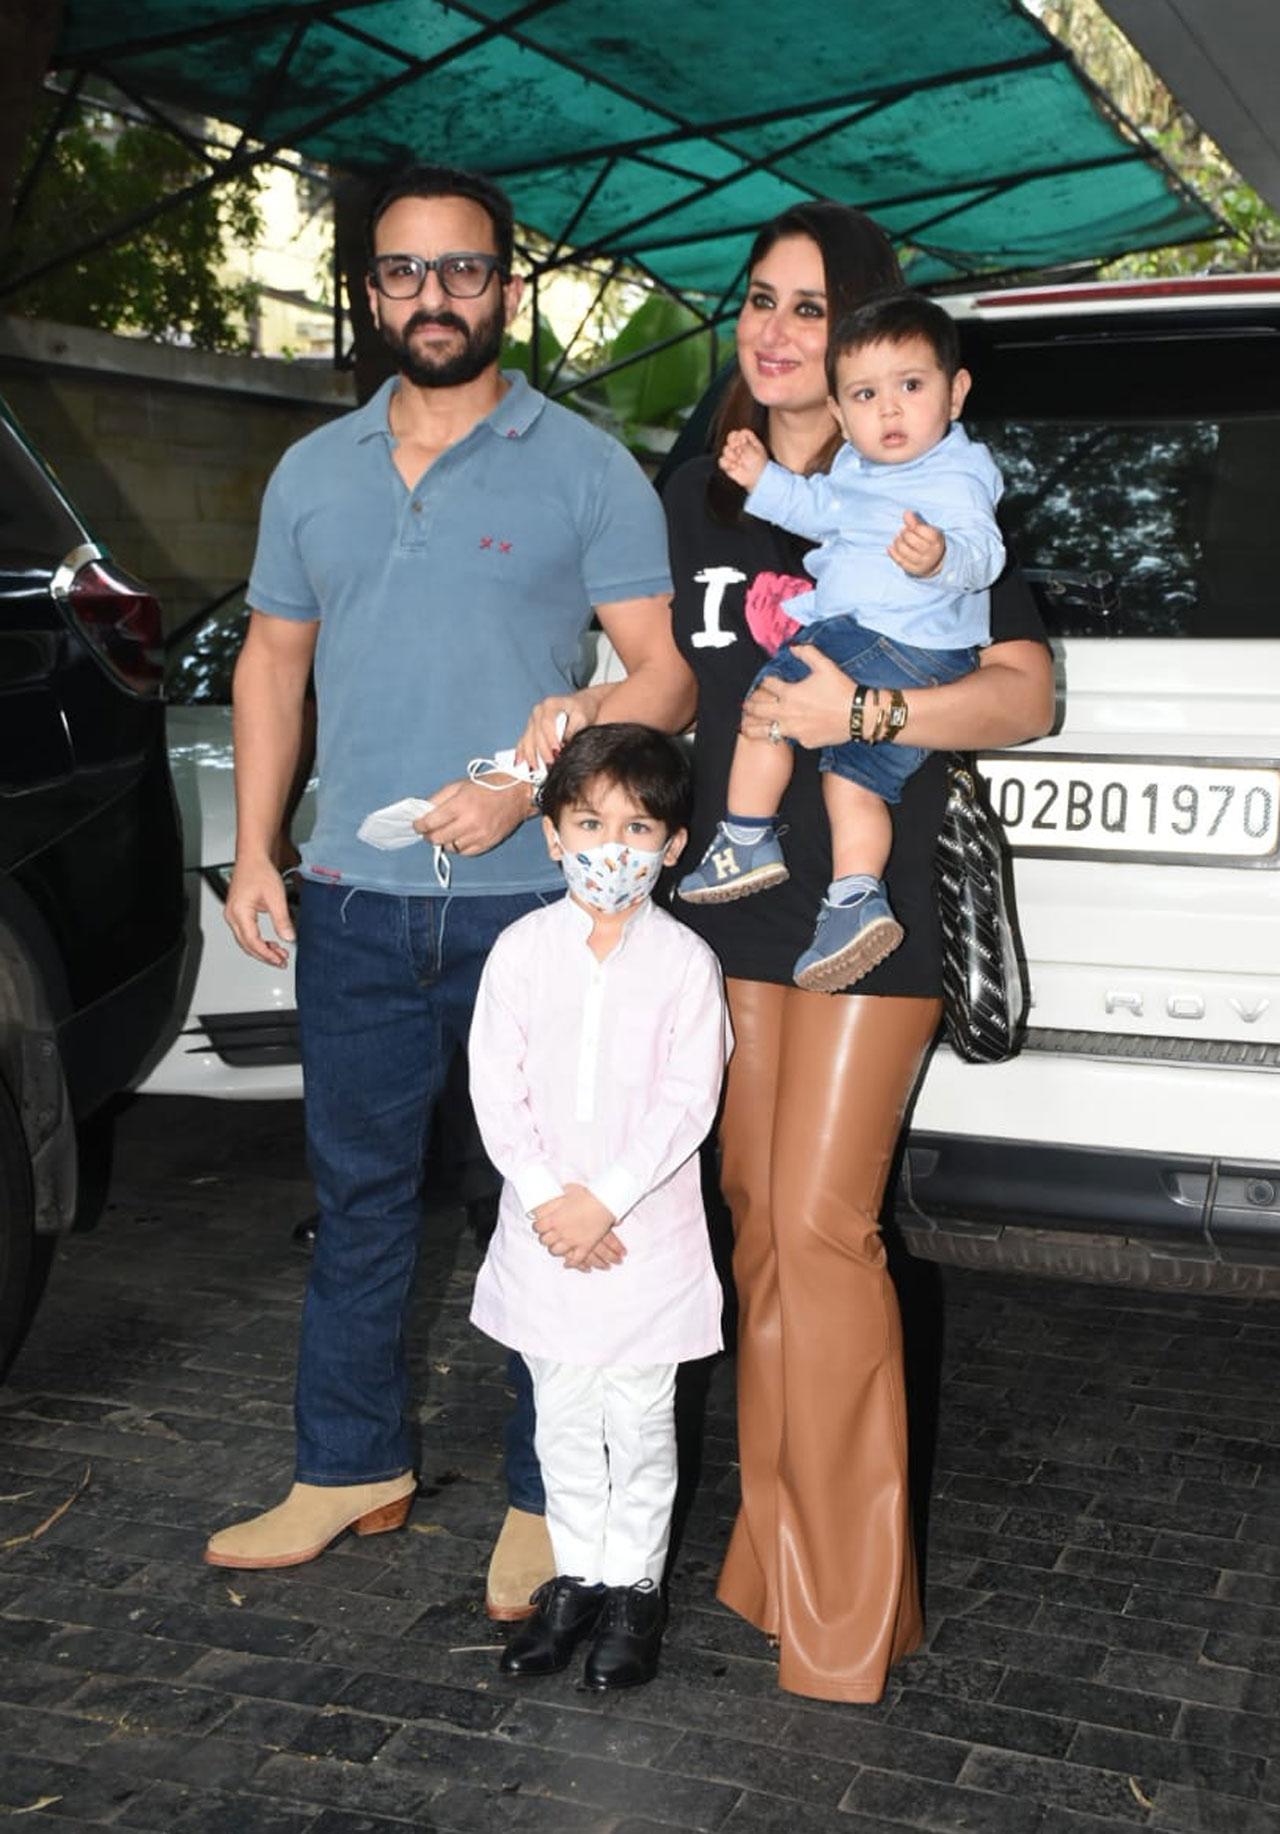 Saif Ali Khan and baby Jehangir Ali Khan twinned in blue as they were papped by the media for 2021 Christmas celebrations. Kareena Kapoor Khan donned a unique outfit of a black tee and shiny brown pants whereas Taimur Ali Khan aced his traditional outfit for the day.